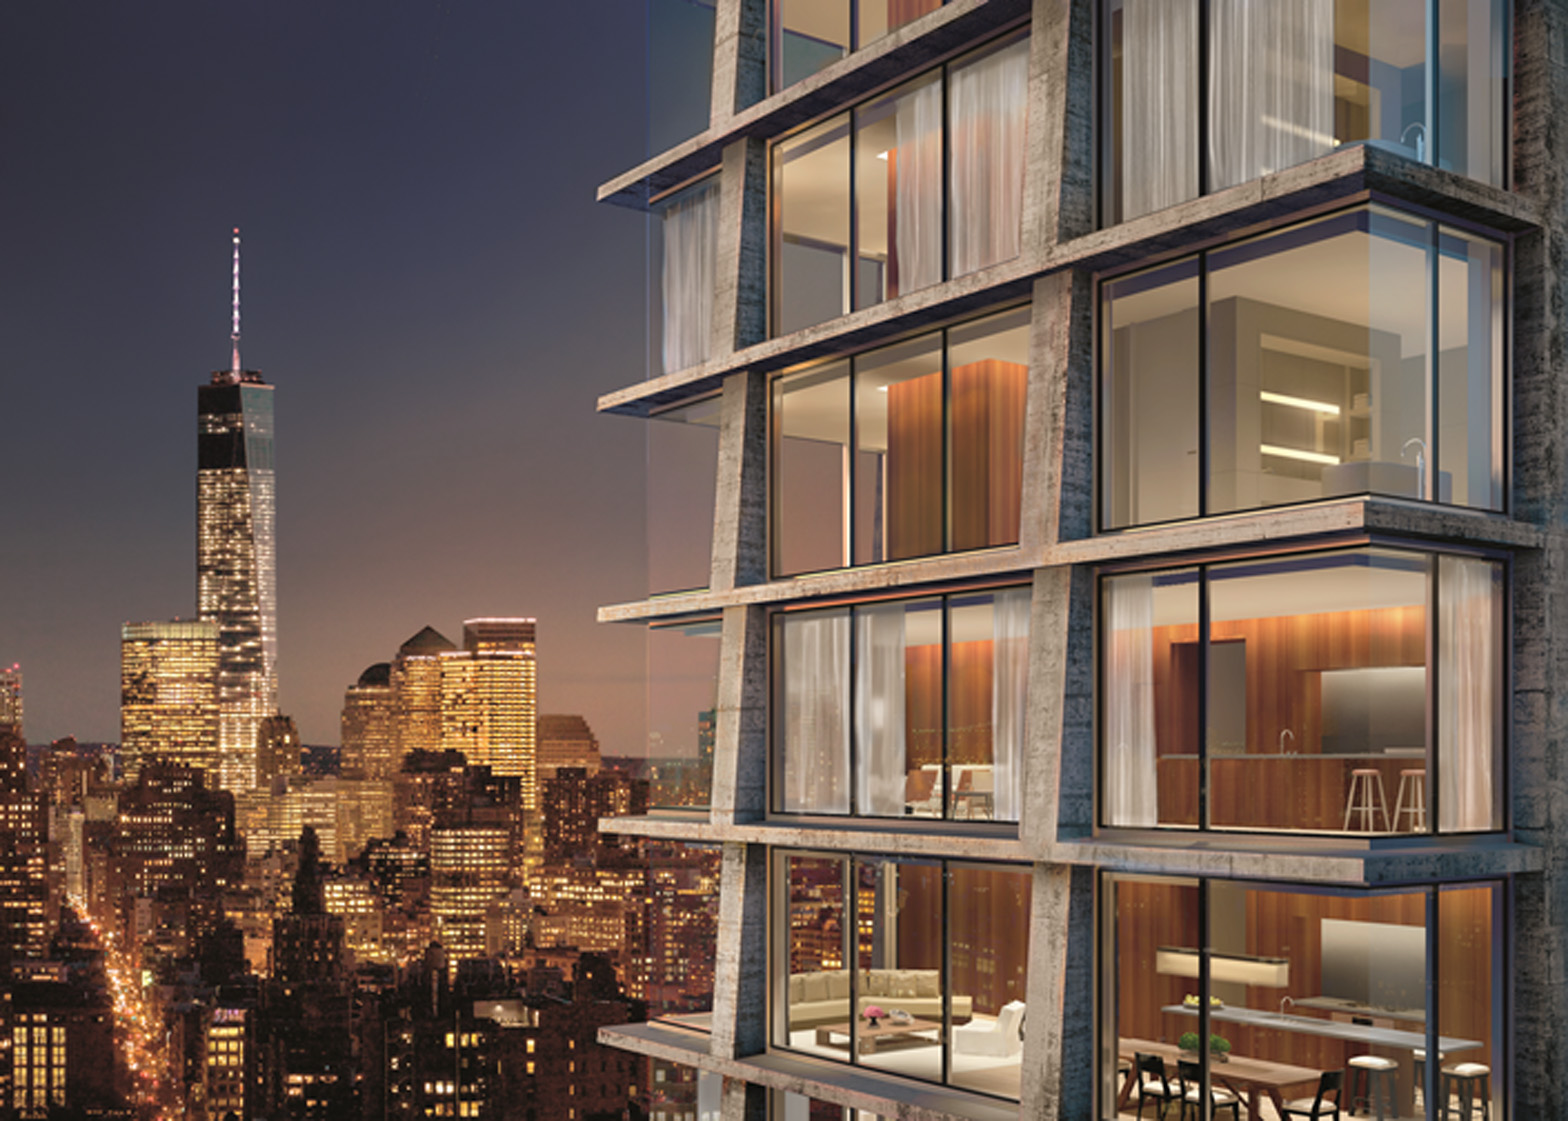 215 Chrystie in New York City by Ian Schrager